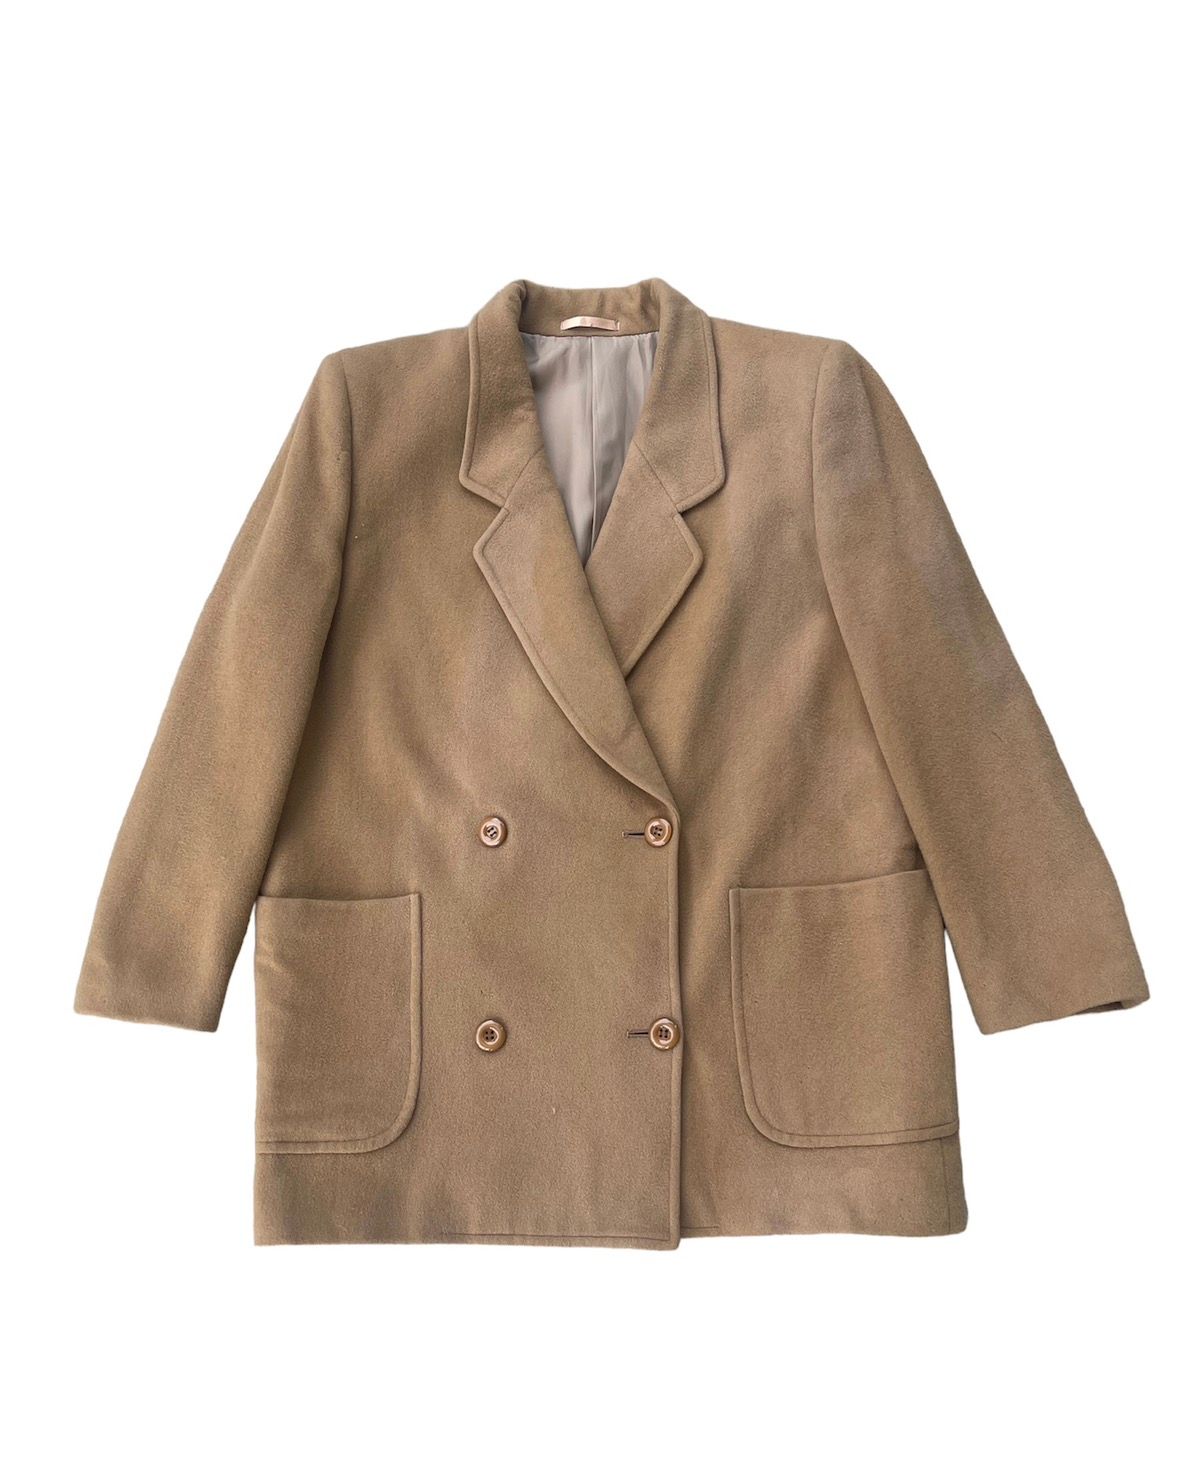 BURBERRY PRORSUM WOOL DOUBLE BREASTED JACKET - 1